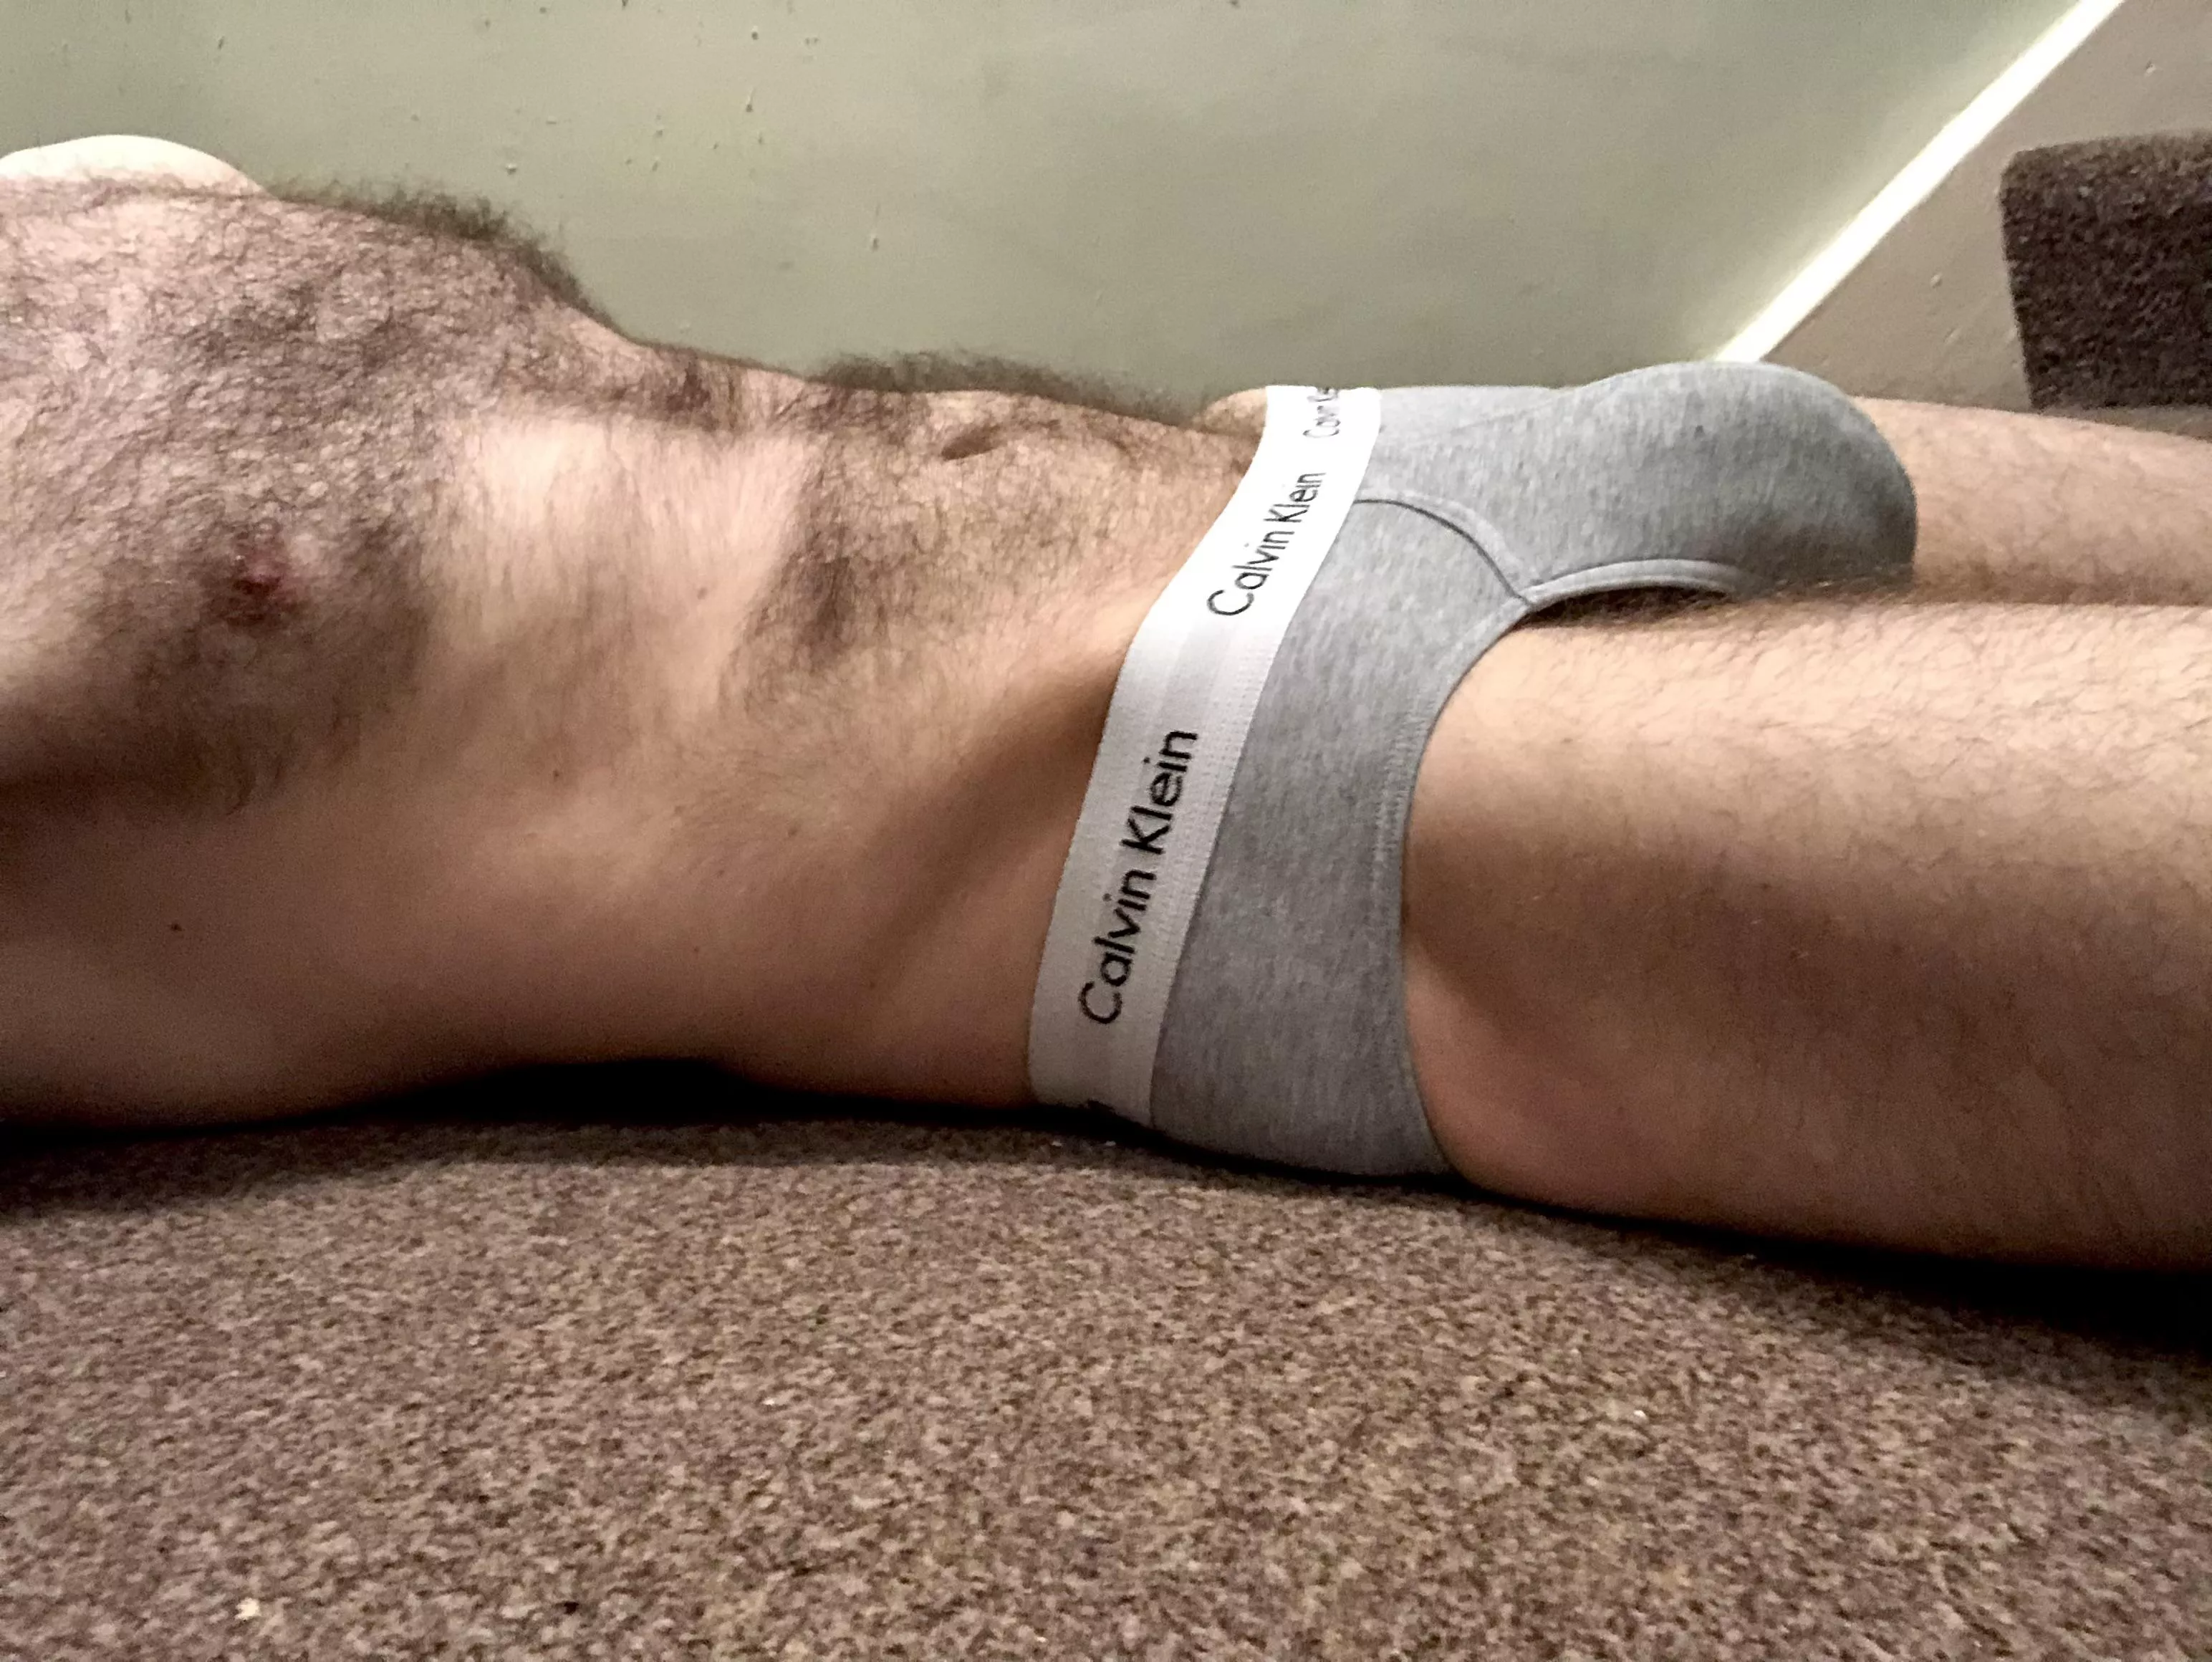 Are skinny hairy guys welcome here? ☺ by sykstrr.